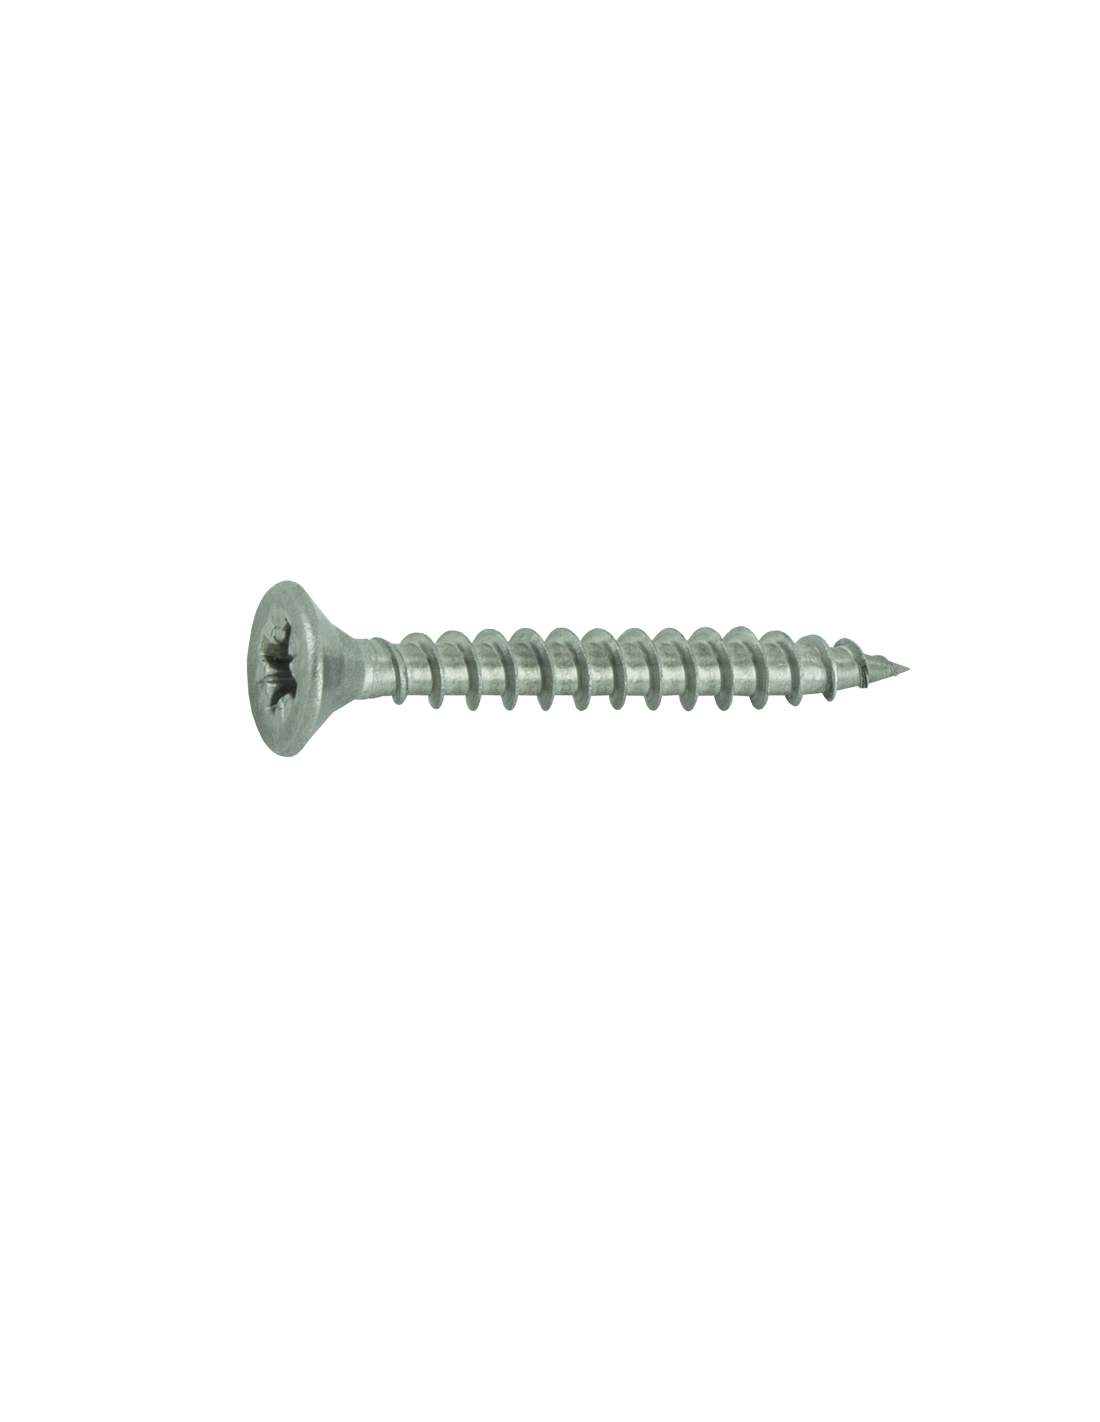 Pozidriv stainless steel A2 5x30 countersunk agglomerated screws, 17 pcs.